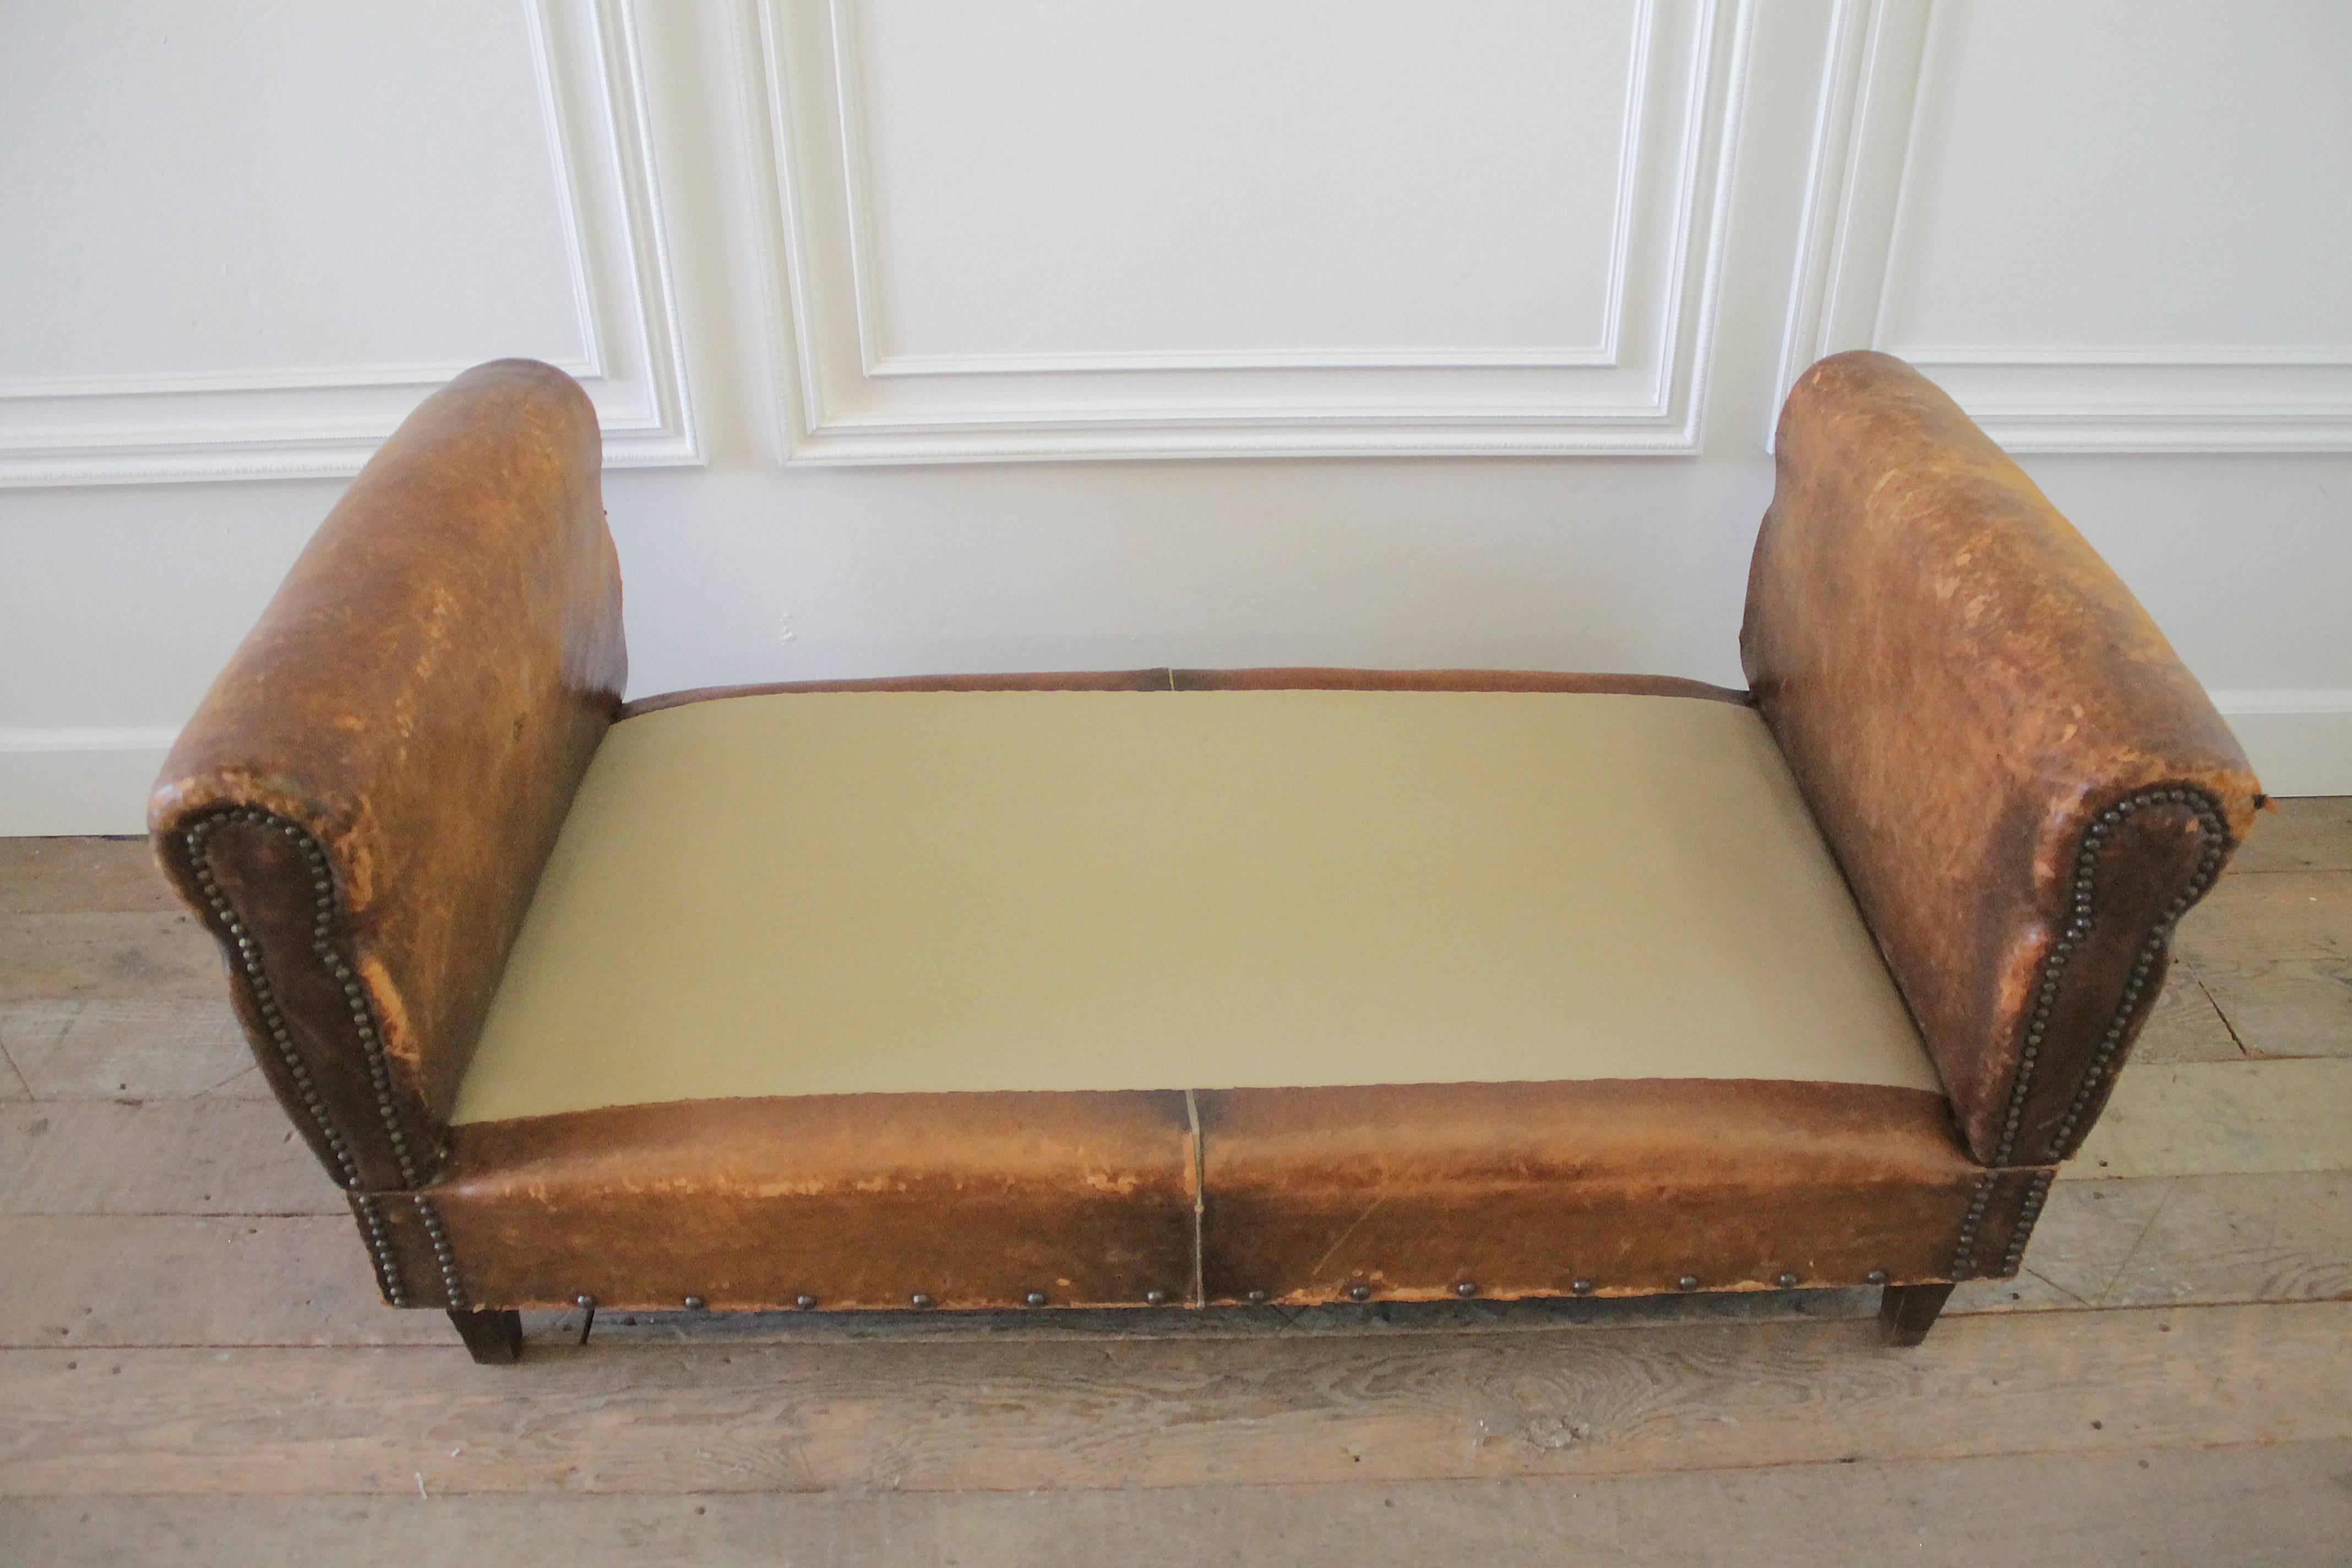 Down Antique French Leather Drop Arm Daybed Sofa with French Mattress Ticking